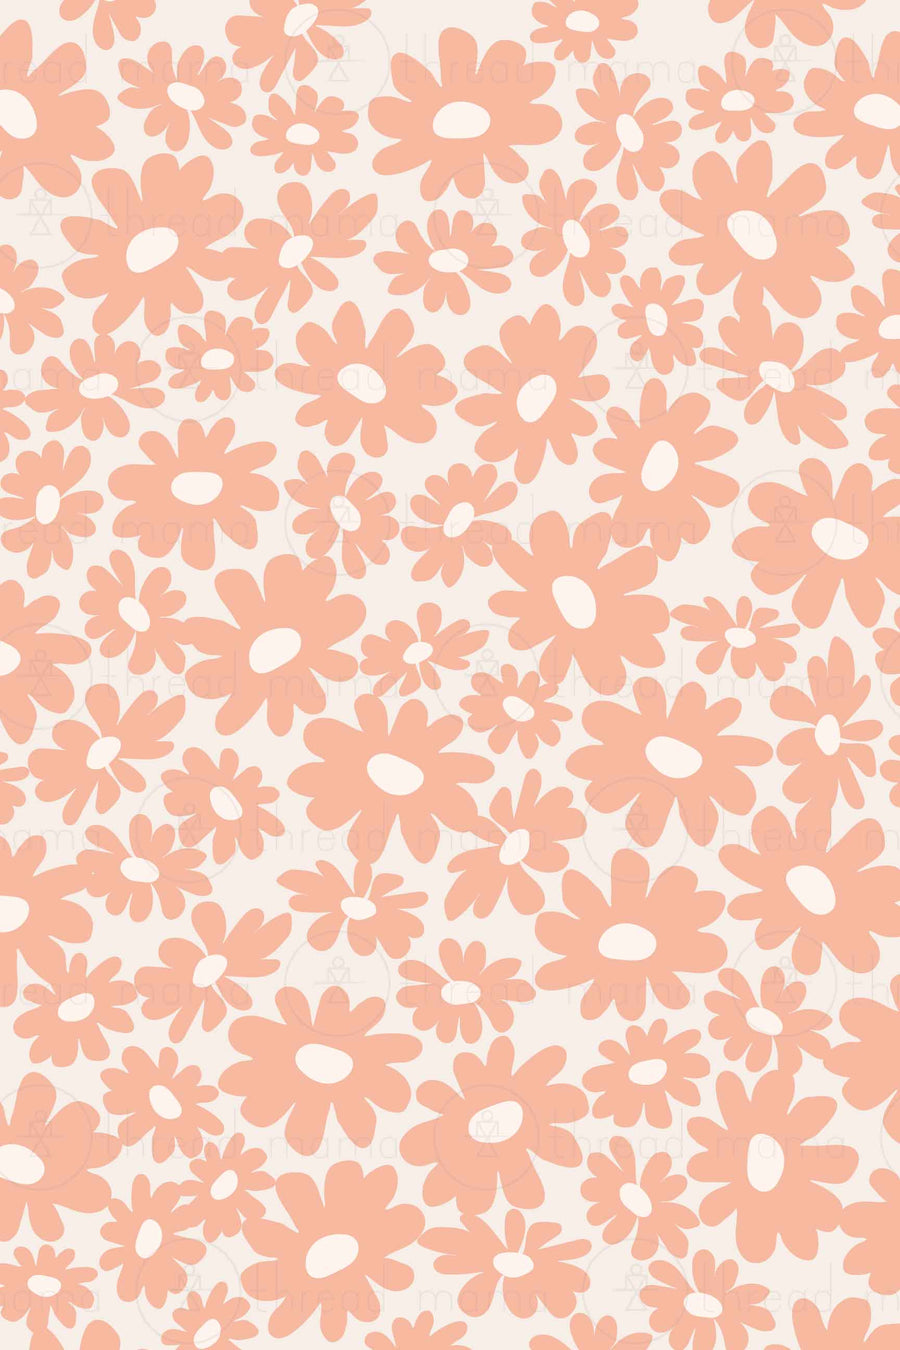 Repeating Pattern 51 Collection (Seamless)